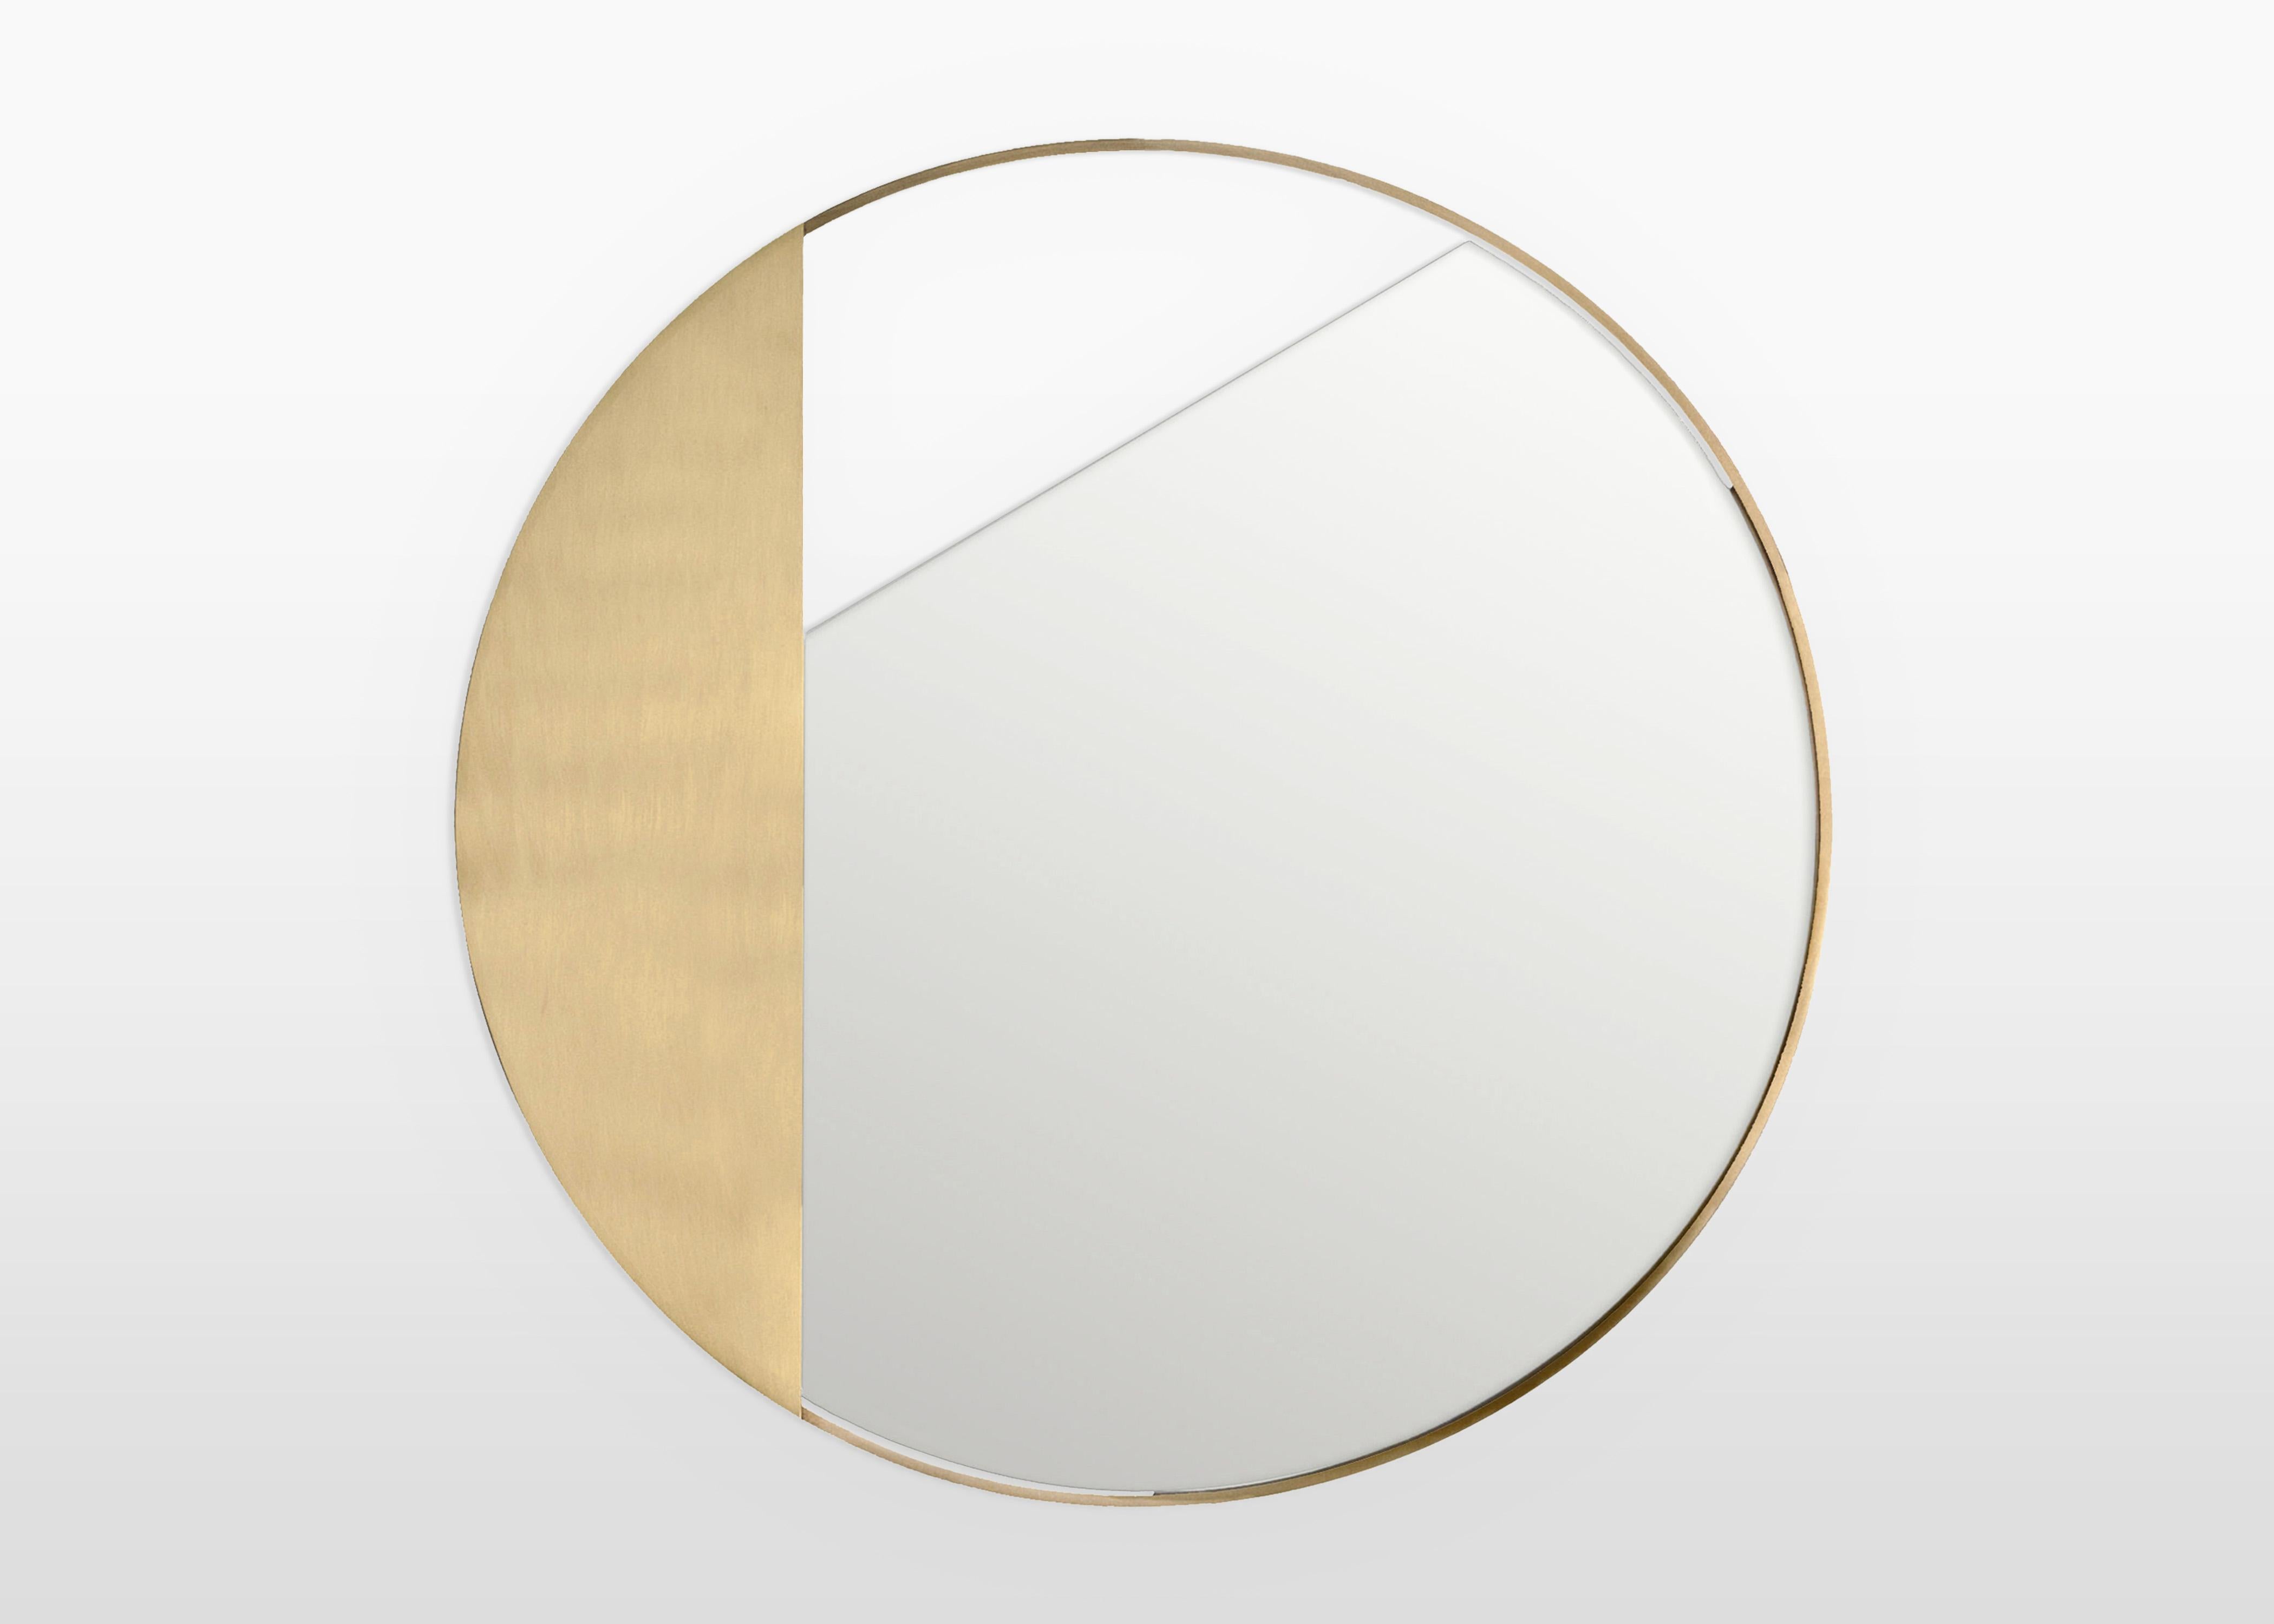 Edition mirror by Edizione Limitata
Limited edition of 1000 pieces. Signed and numbered.
Designers: Simone Fanciullacci
Dimensions: D 4 x Ø 90 cm.
Materials: brushed brass, mirror

Edizione Limitata, that is to say “Limited Edition”, is a brand